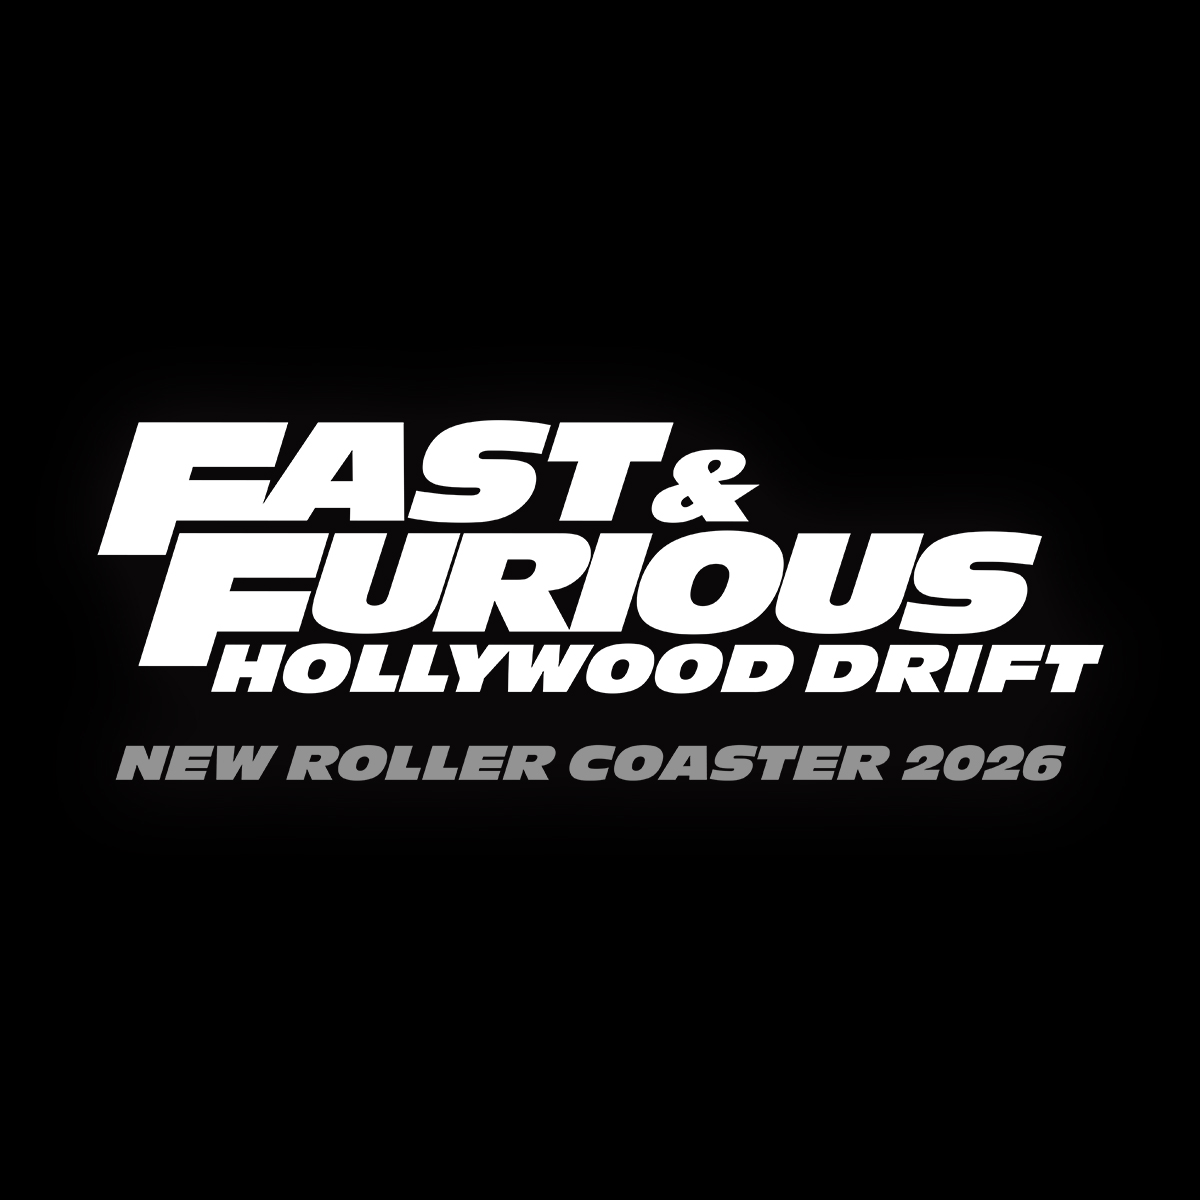 From groundbreaking technology to breathtaking immersion, there is no other roller coaster like Fast & Furious: Hollywood Drift. Coming in 2026. Get details: spr.ly/6015jroXR